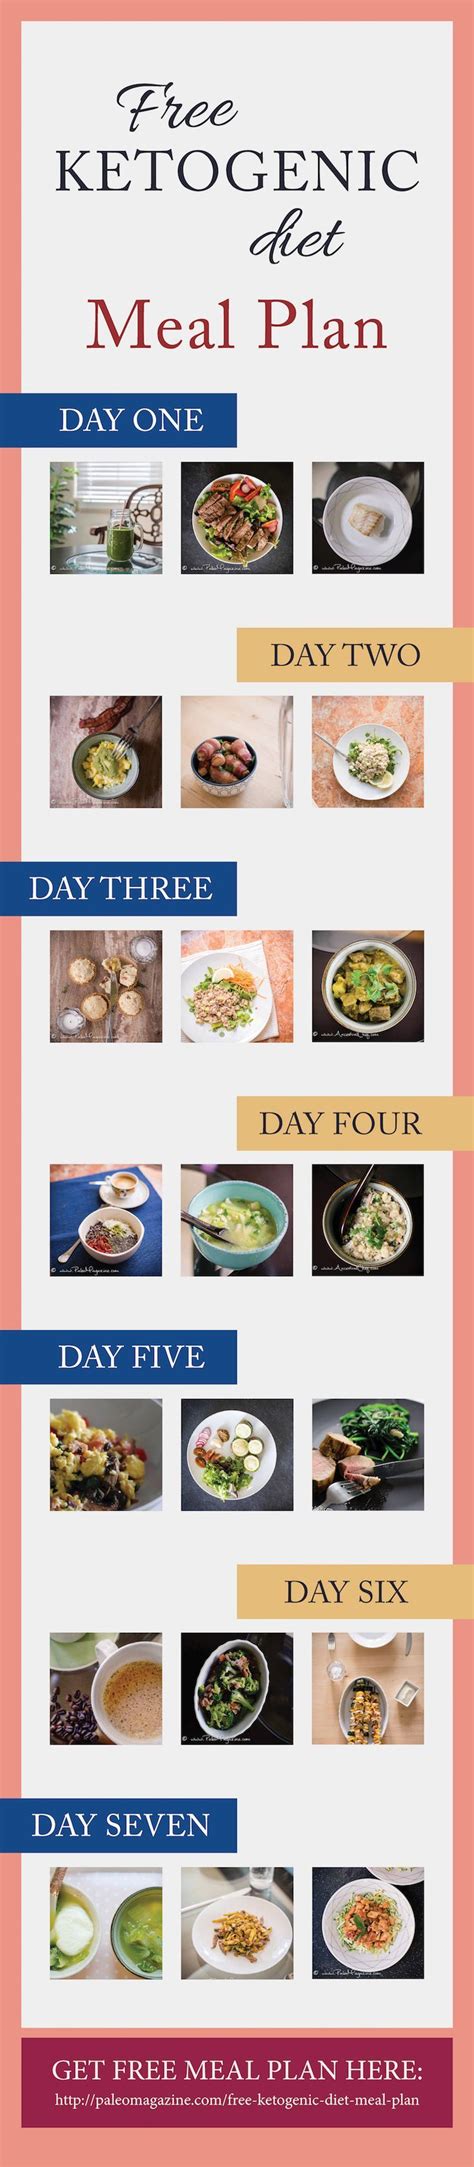 7 Day Free Ketogenic Meal Plan Ketogenic Diet Meal Plan Ketogenic